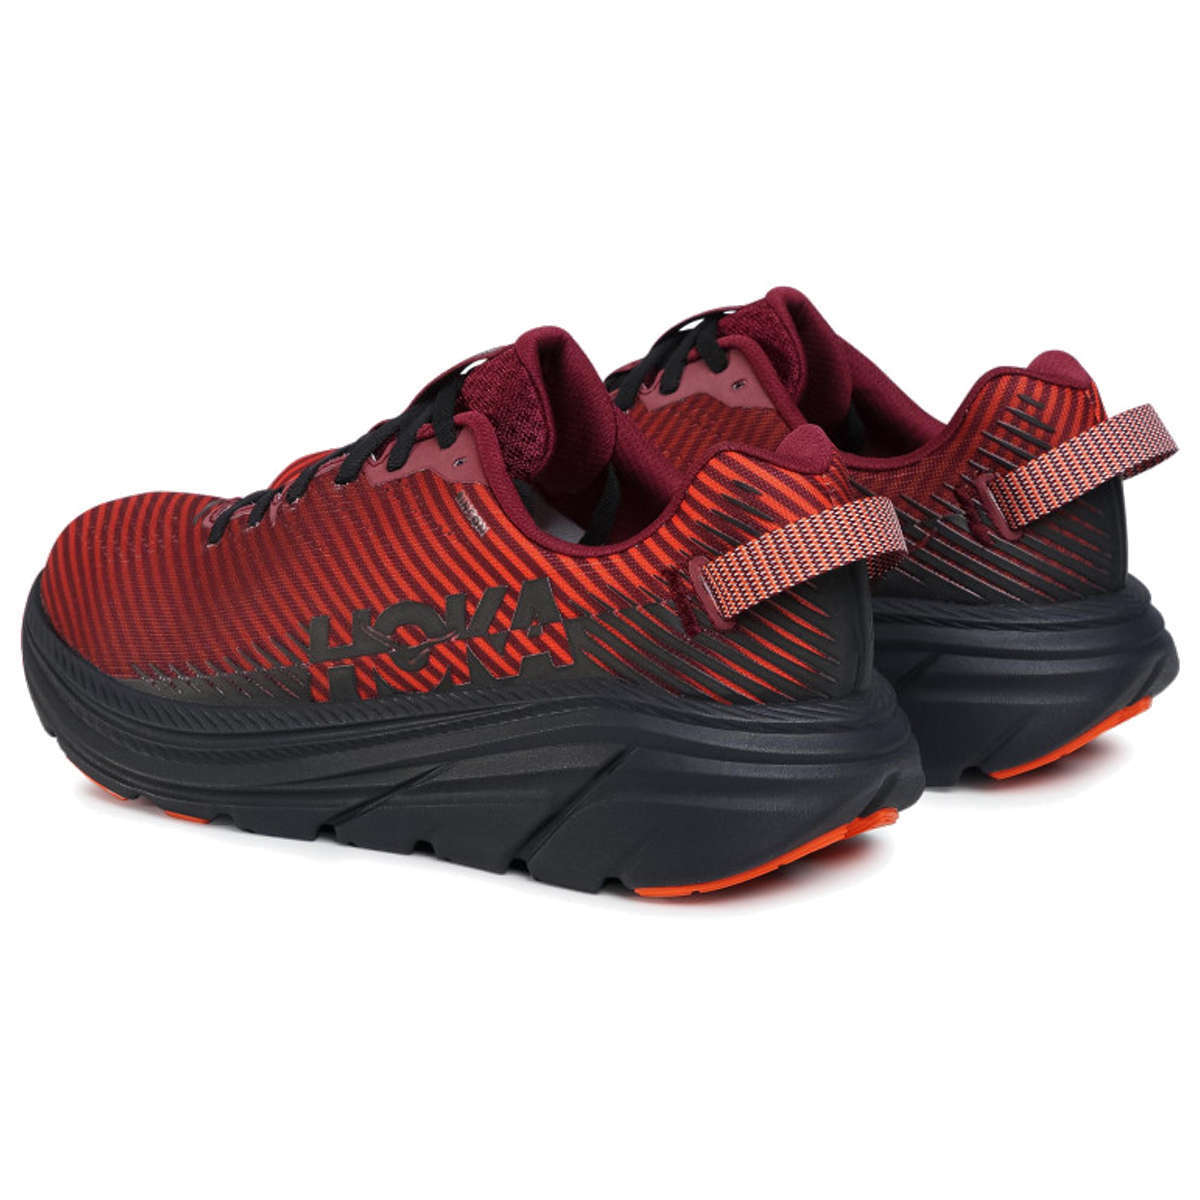 Hoka One One Rincon 2 Mesh Men's Low-Top Road Running Trainers#color_cordovan anthracite